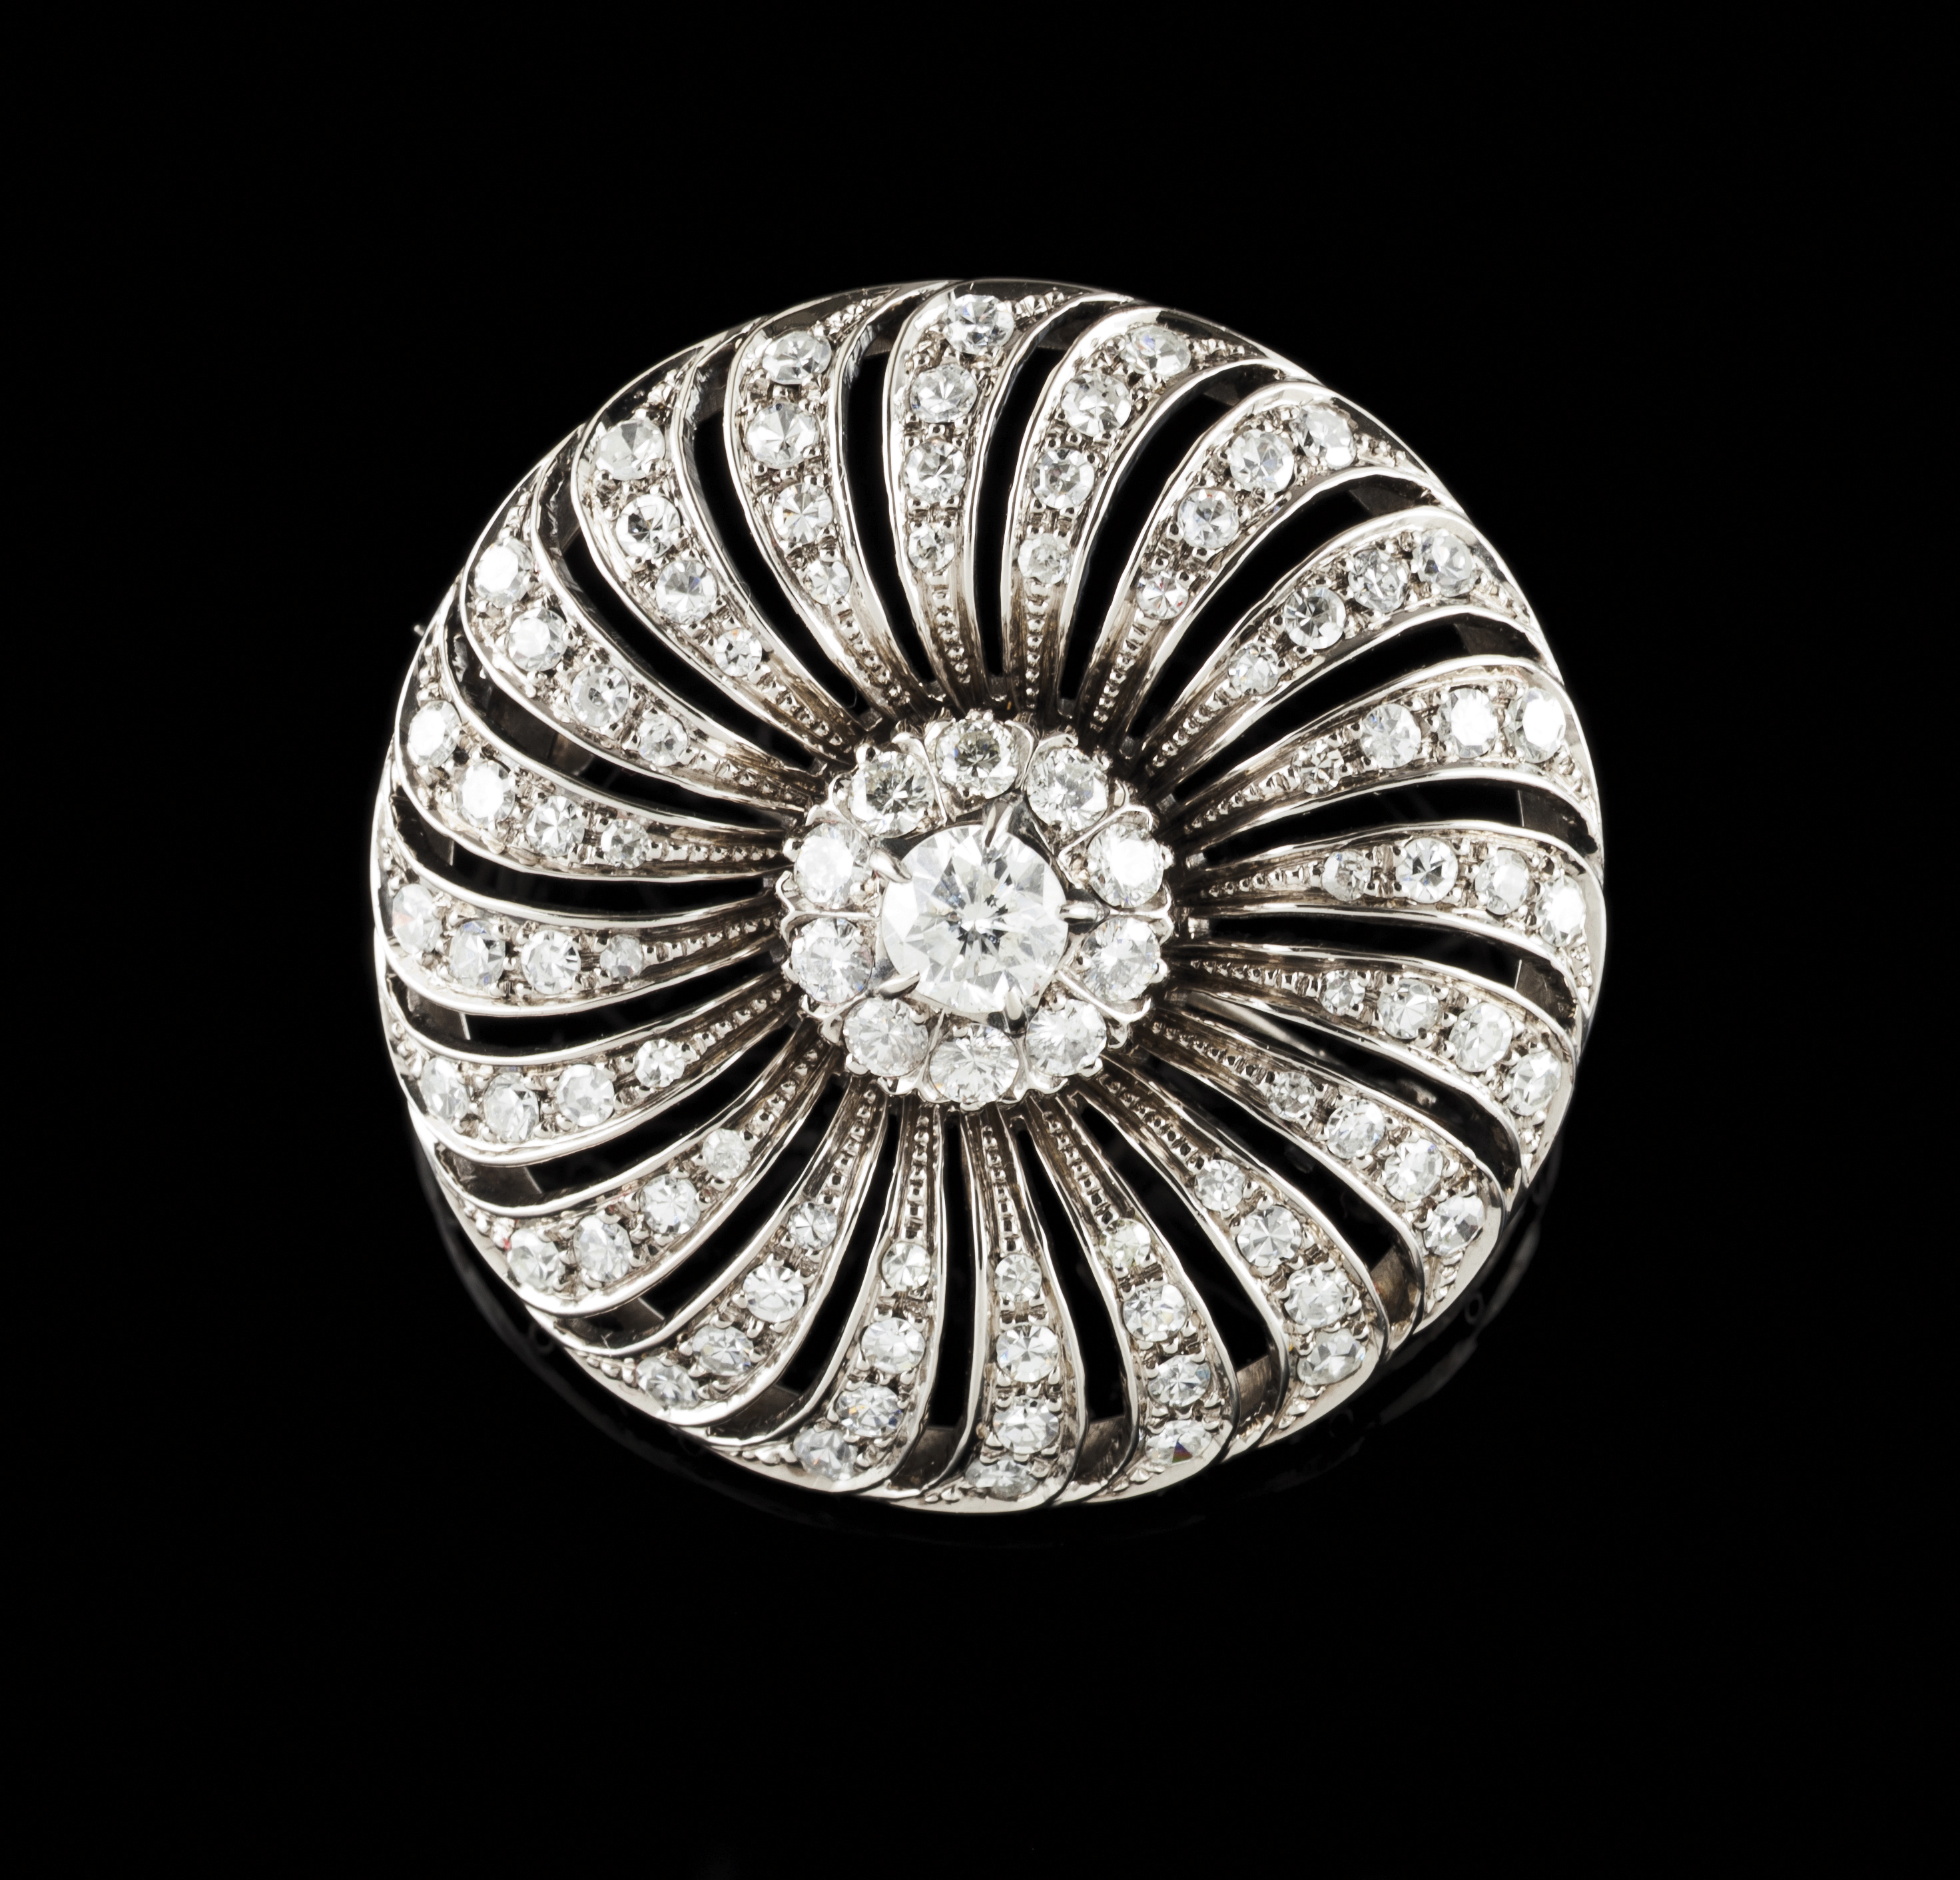 A broochWhite gold Spiralled decoration rose of centre set with 11 brilliant cut diamonds